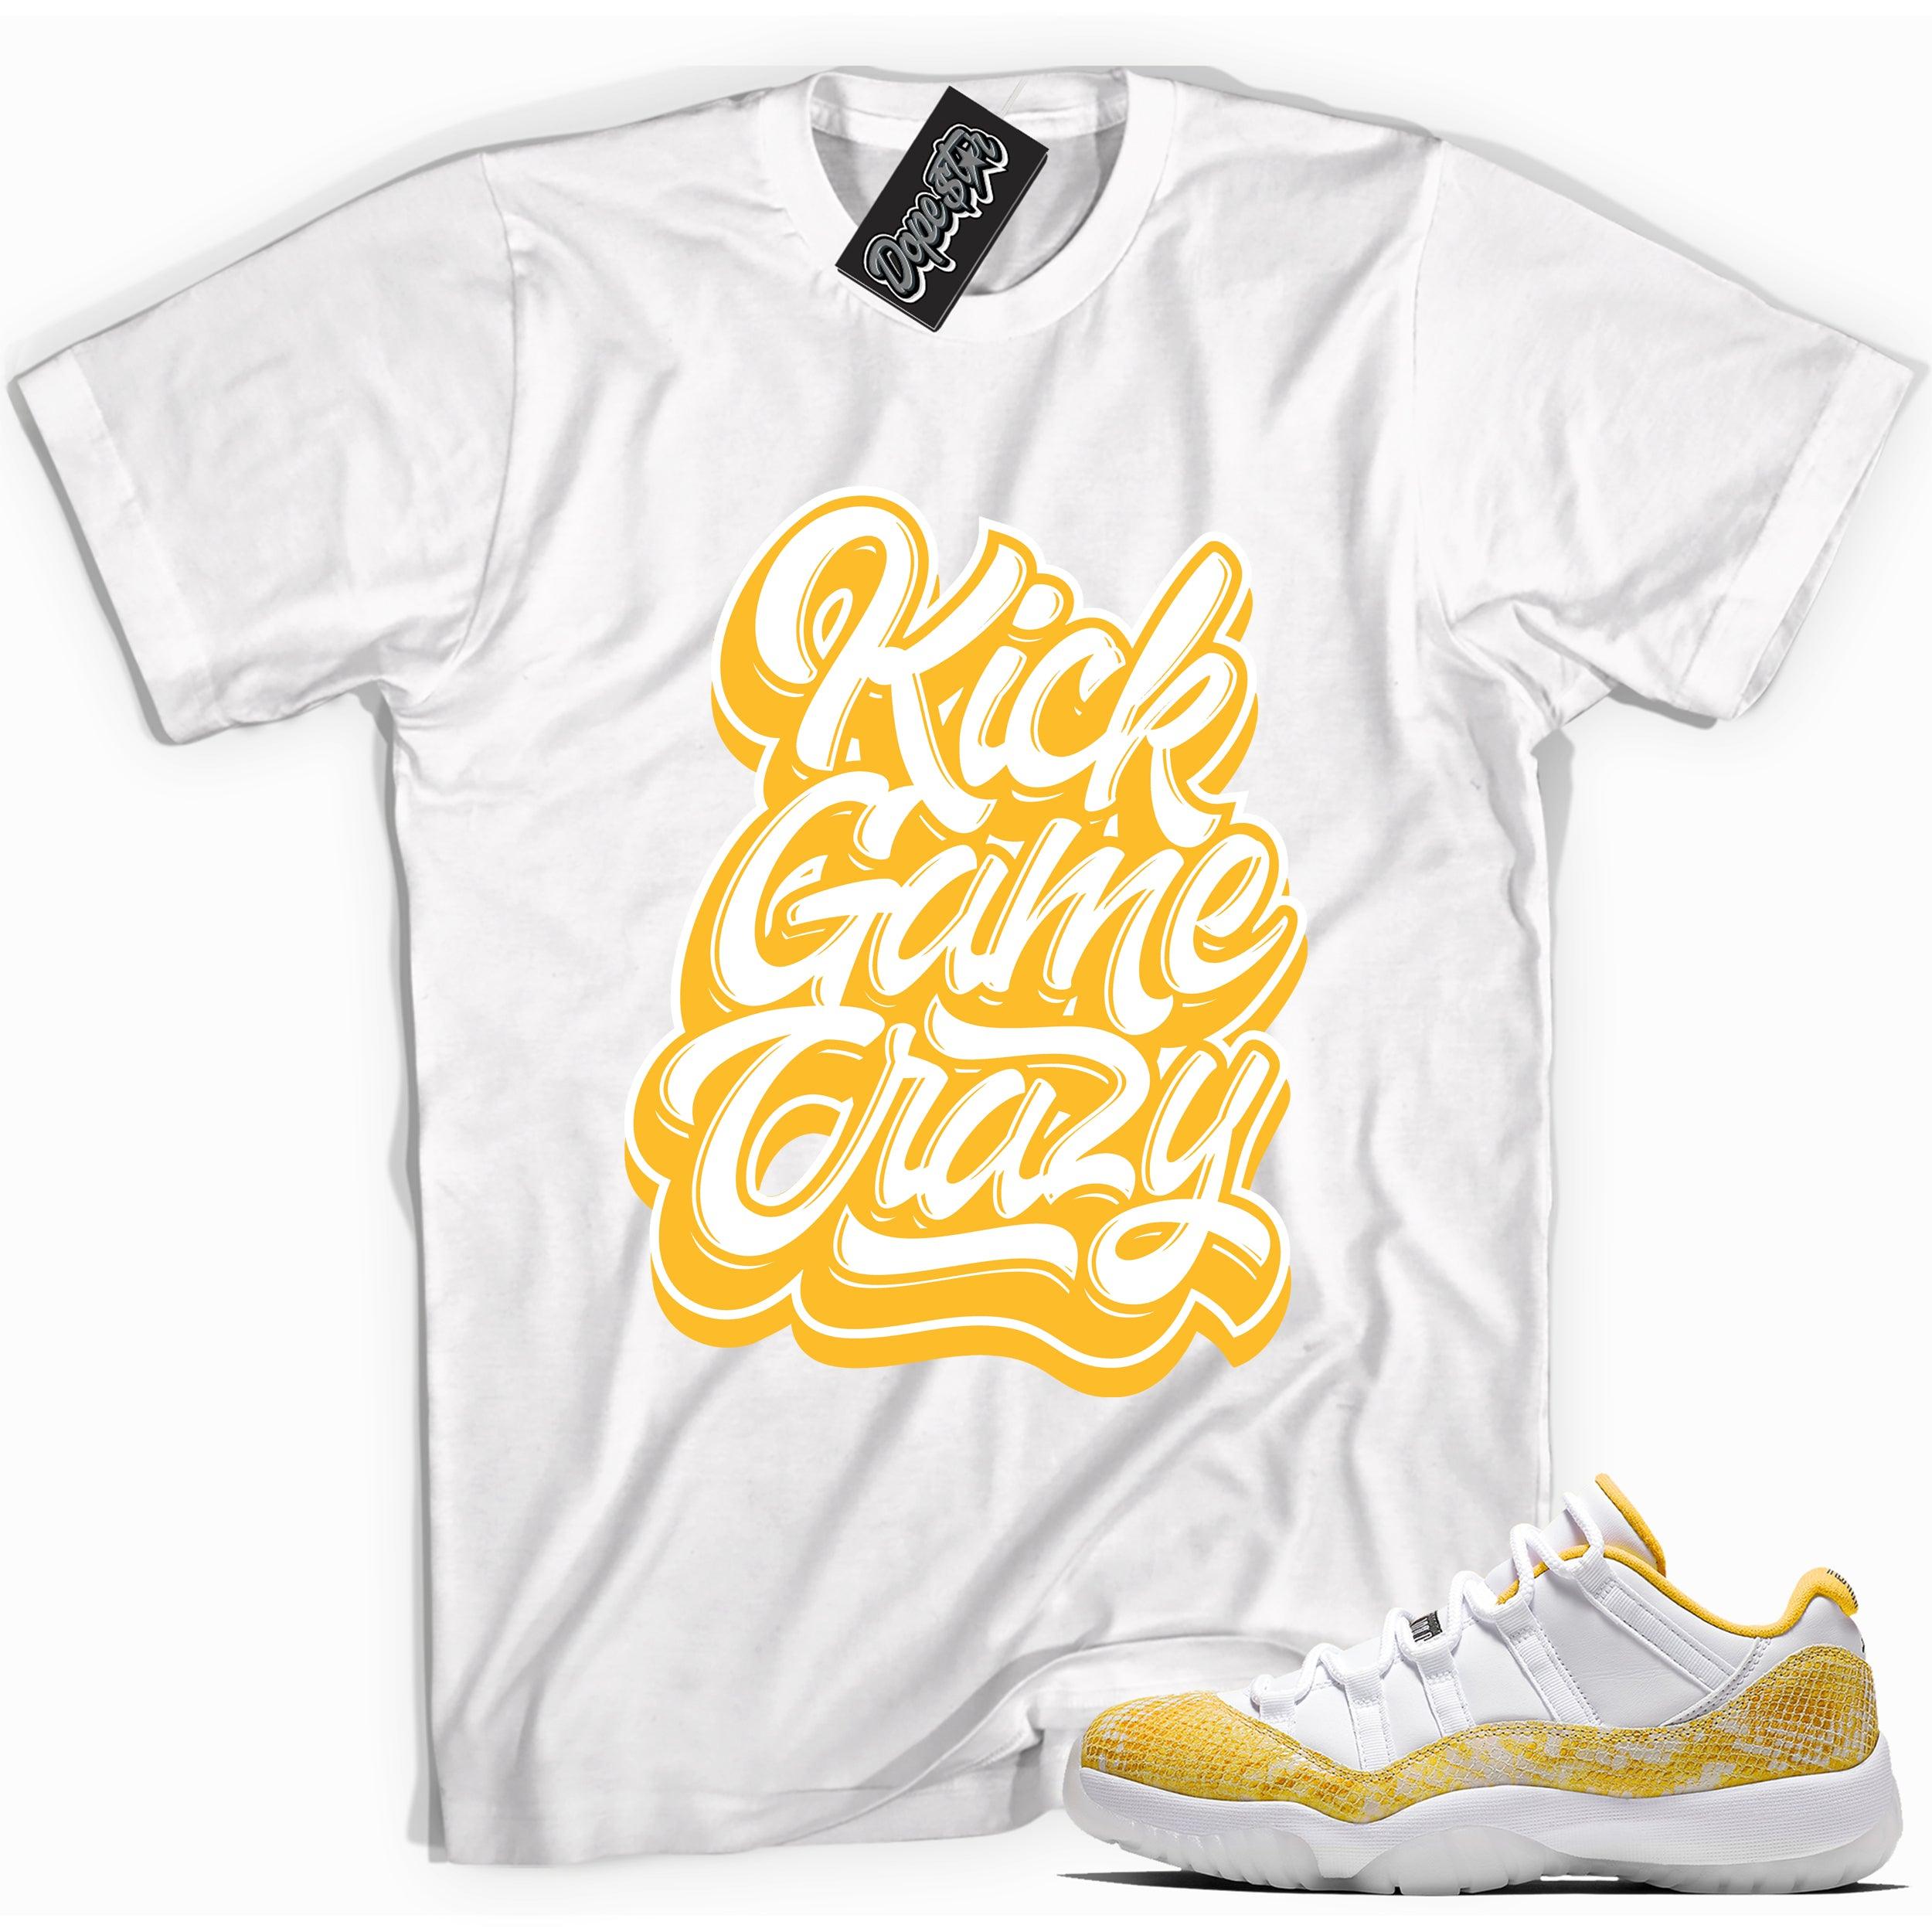 Cool white graphic tee with 'kick game crazy' print, that perfectly matches Air Jordan 11 Low Yellow Snakeskin sneakers